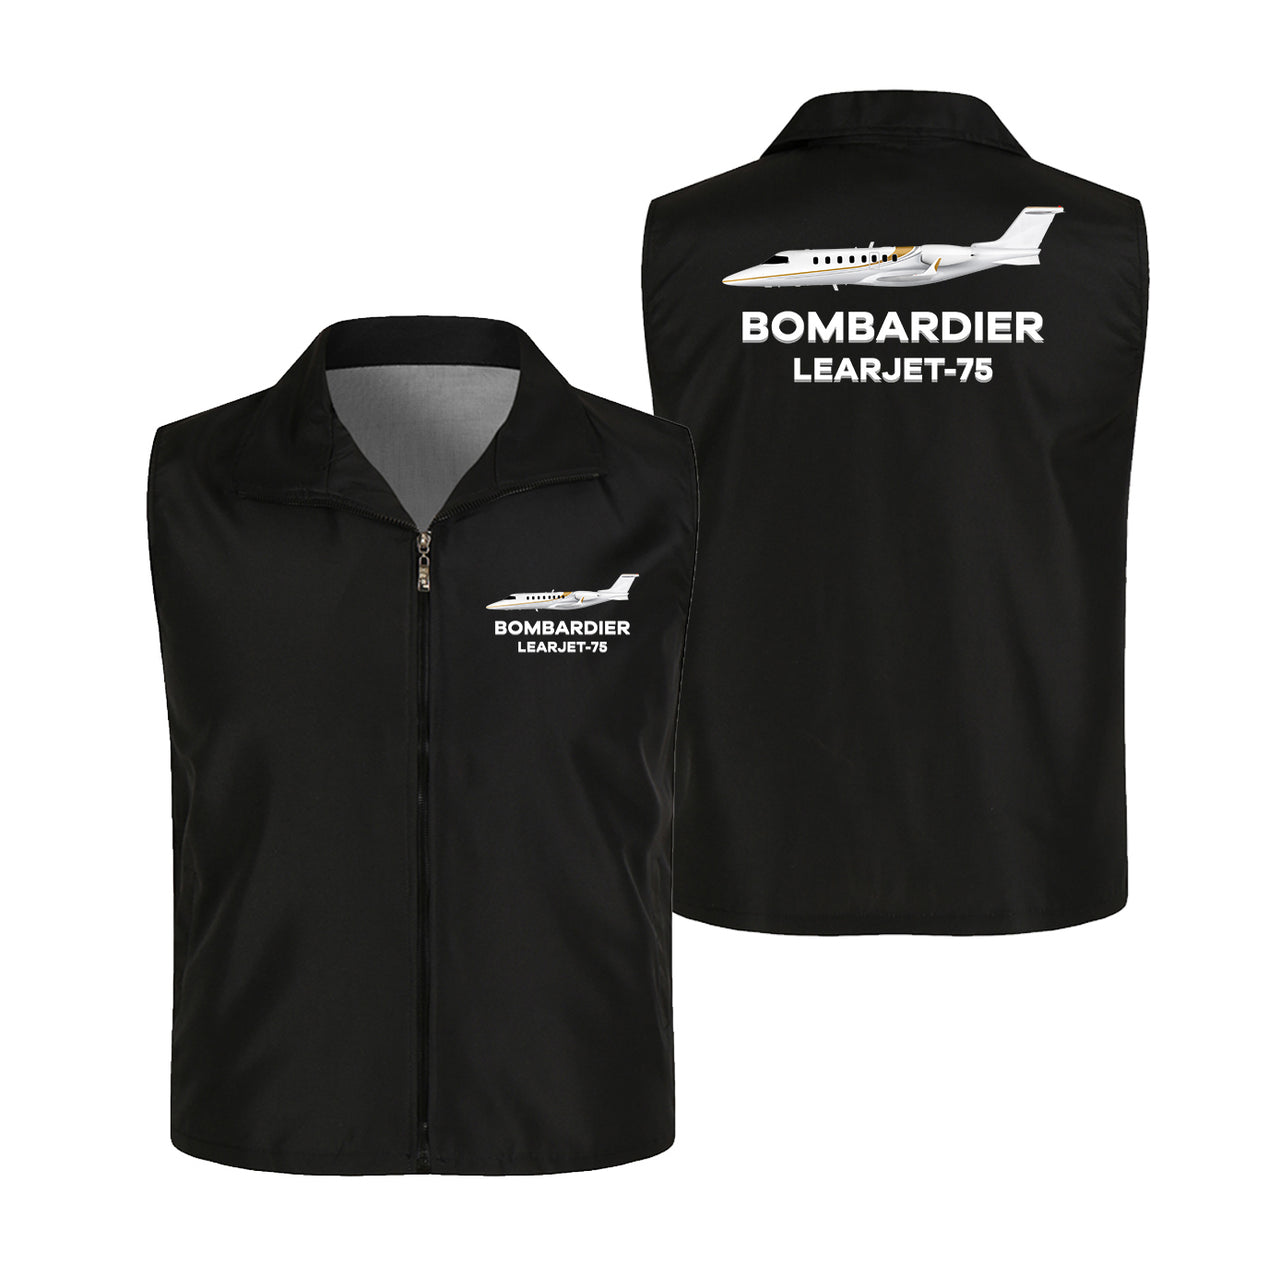 The Bombardier Learjet 75 Designed Thin Style Vests